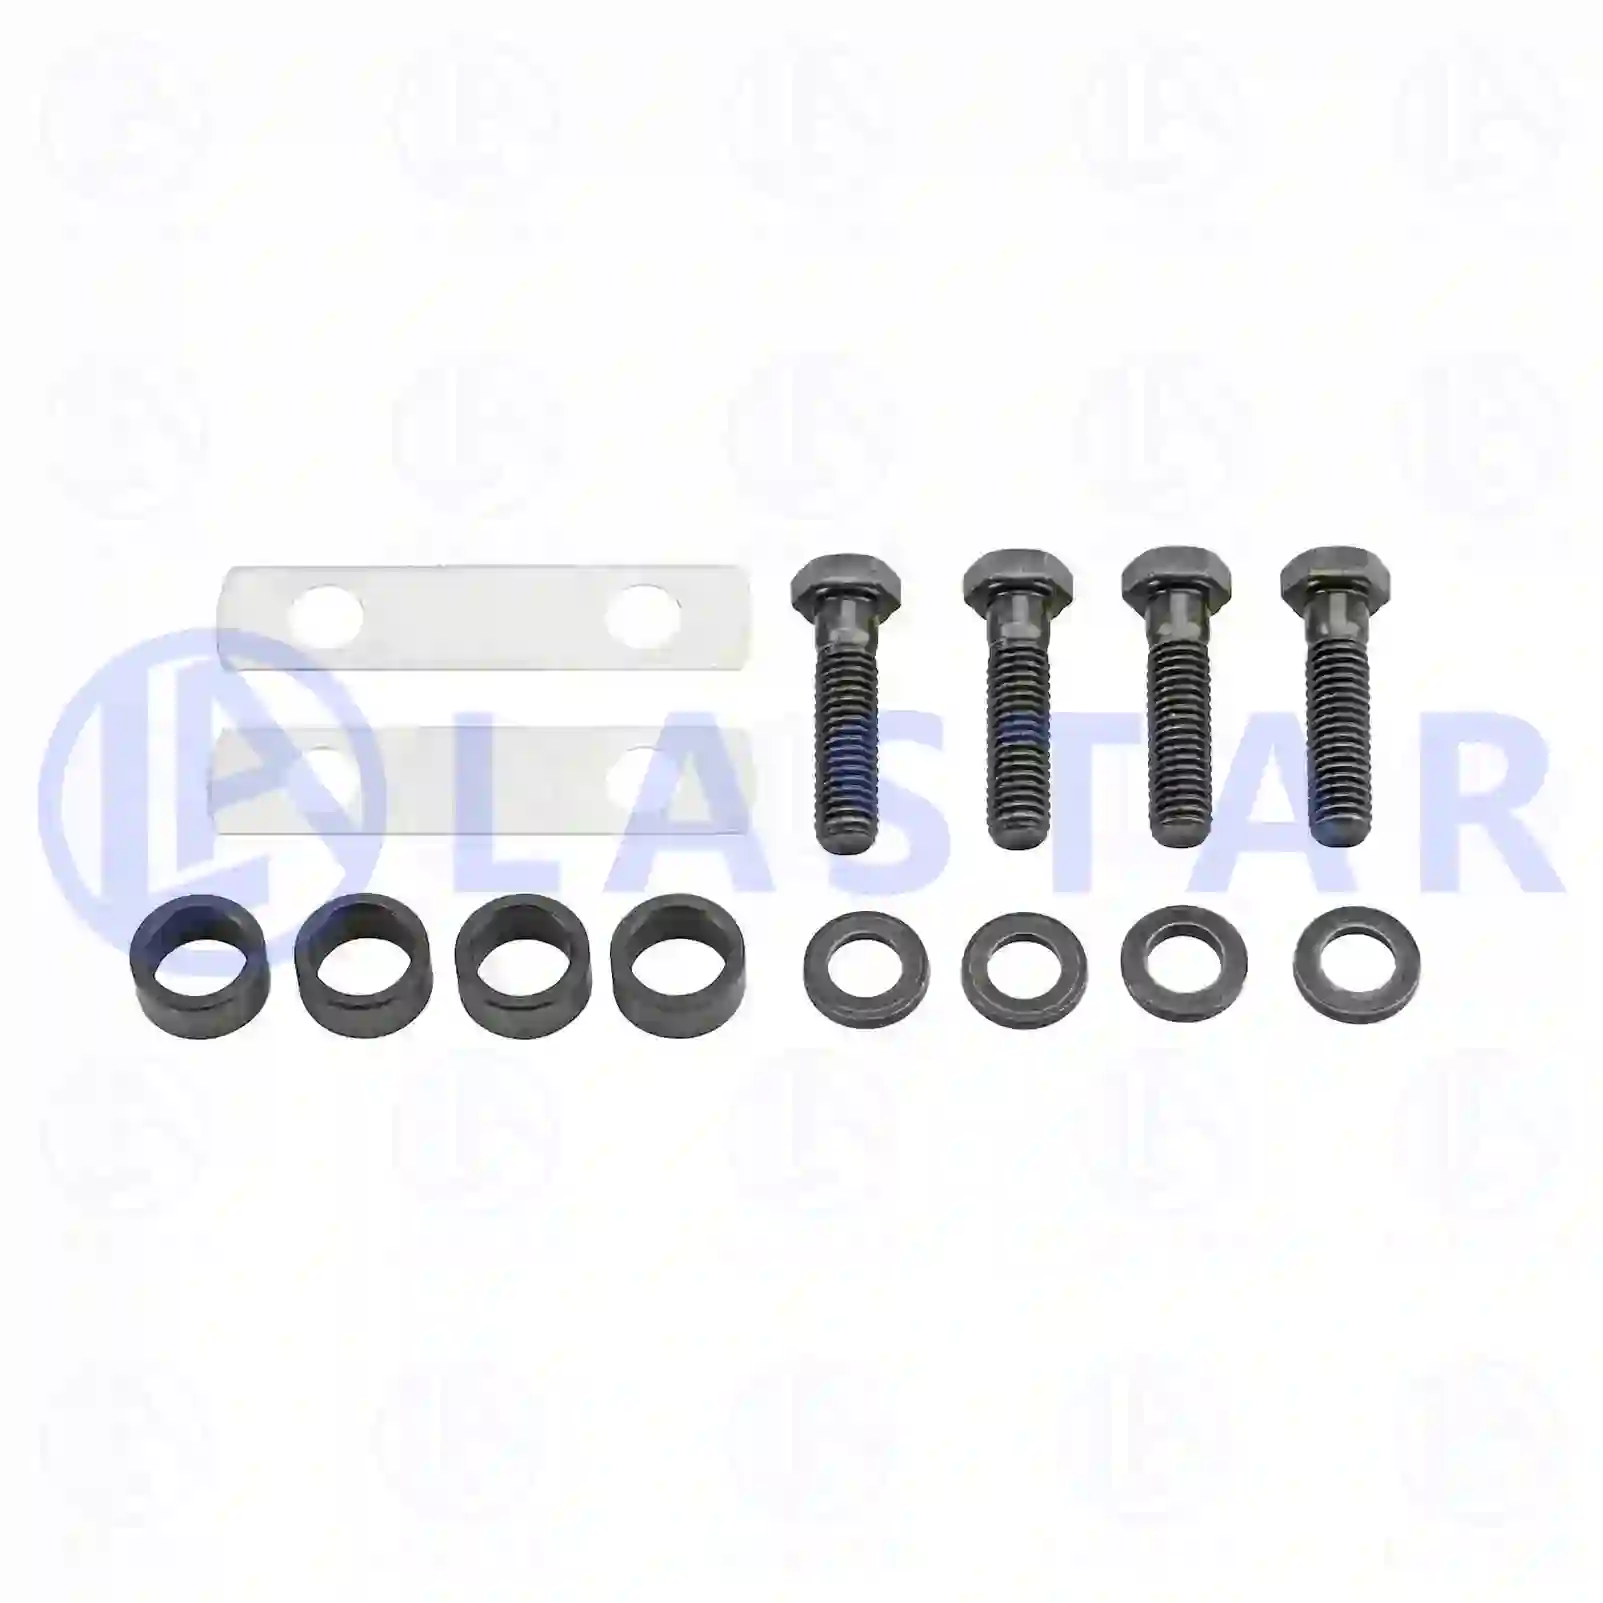 Mounting kit, 77704266, 945698S, 966717S, ZG01400-0008 ||  77704266 Lastar Spare Part | Truck Spare Parts, Auotomotive Spare Parts Mounting kit, 77704266, 945698S, 966717S, ZG01400-0008 ||  77704266 Lastar Spare Part | Truck Spare Parts, Auotomotive Spare Parts